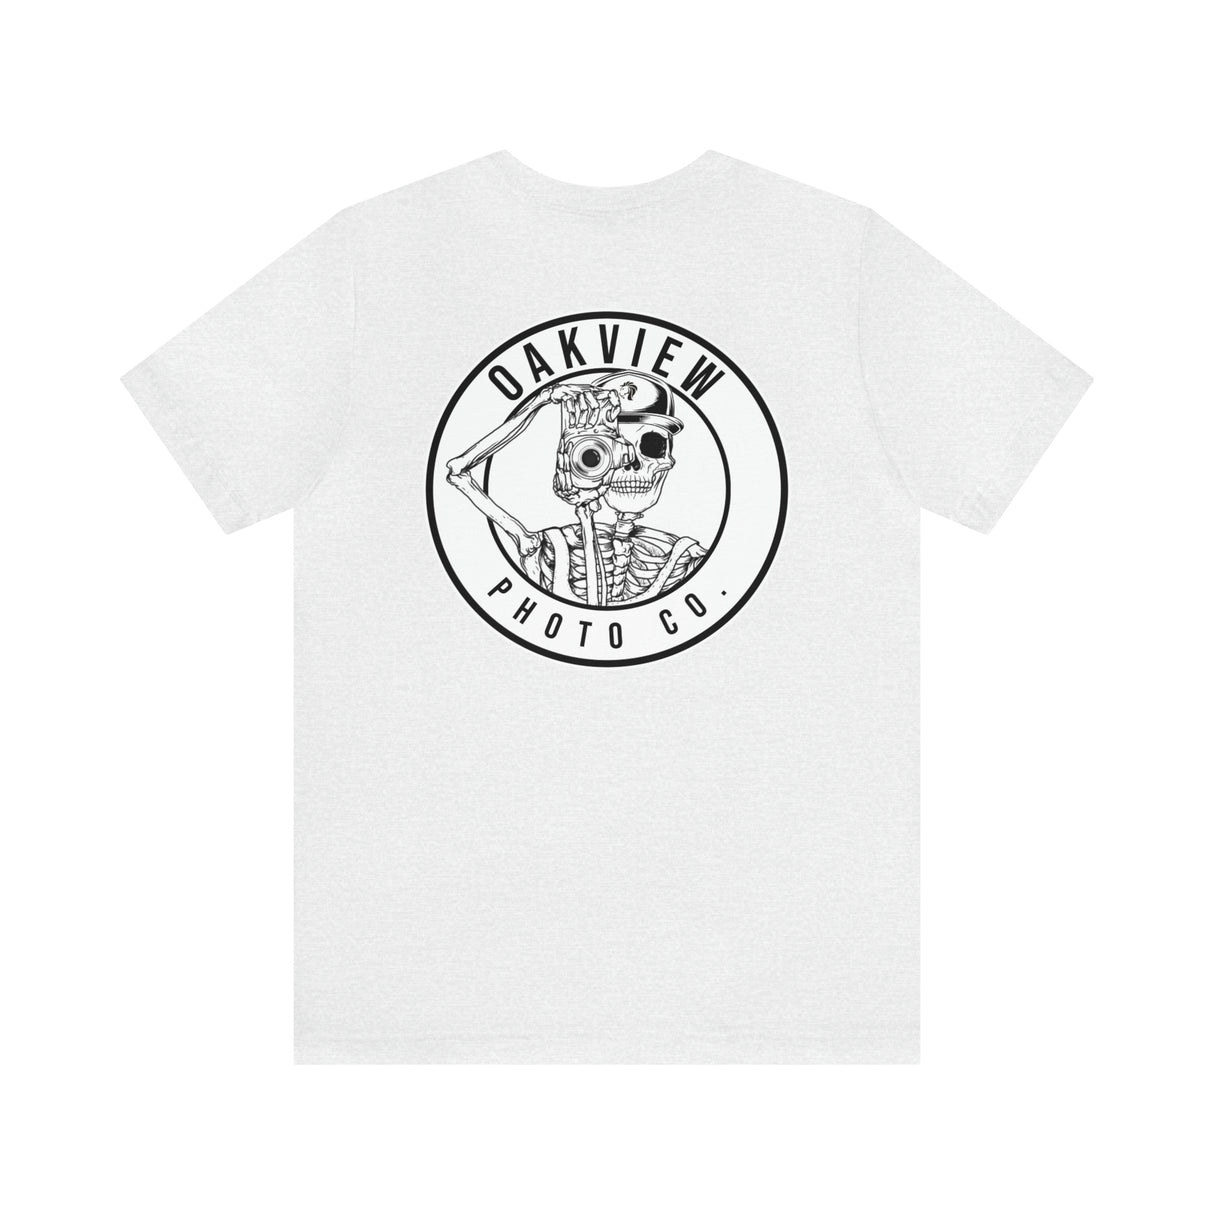 Bang city cotton shirt with sponsors logo on back (White)